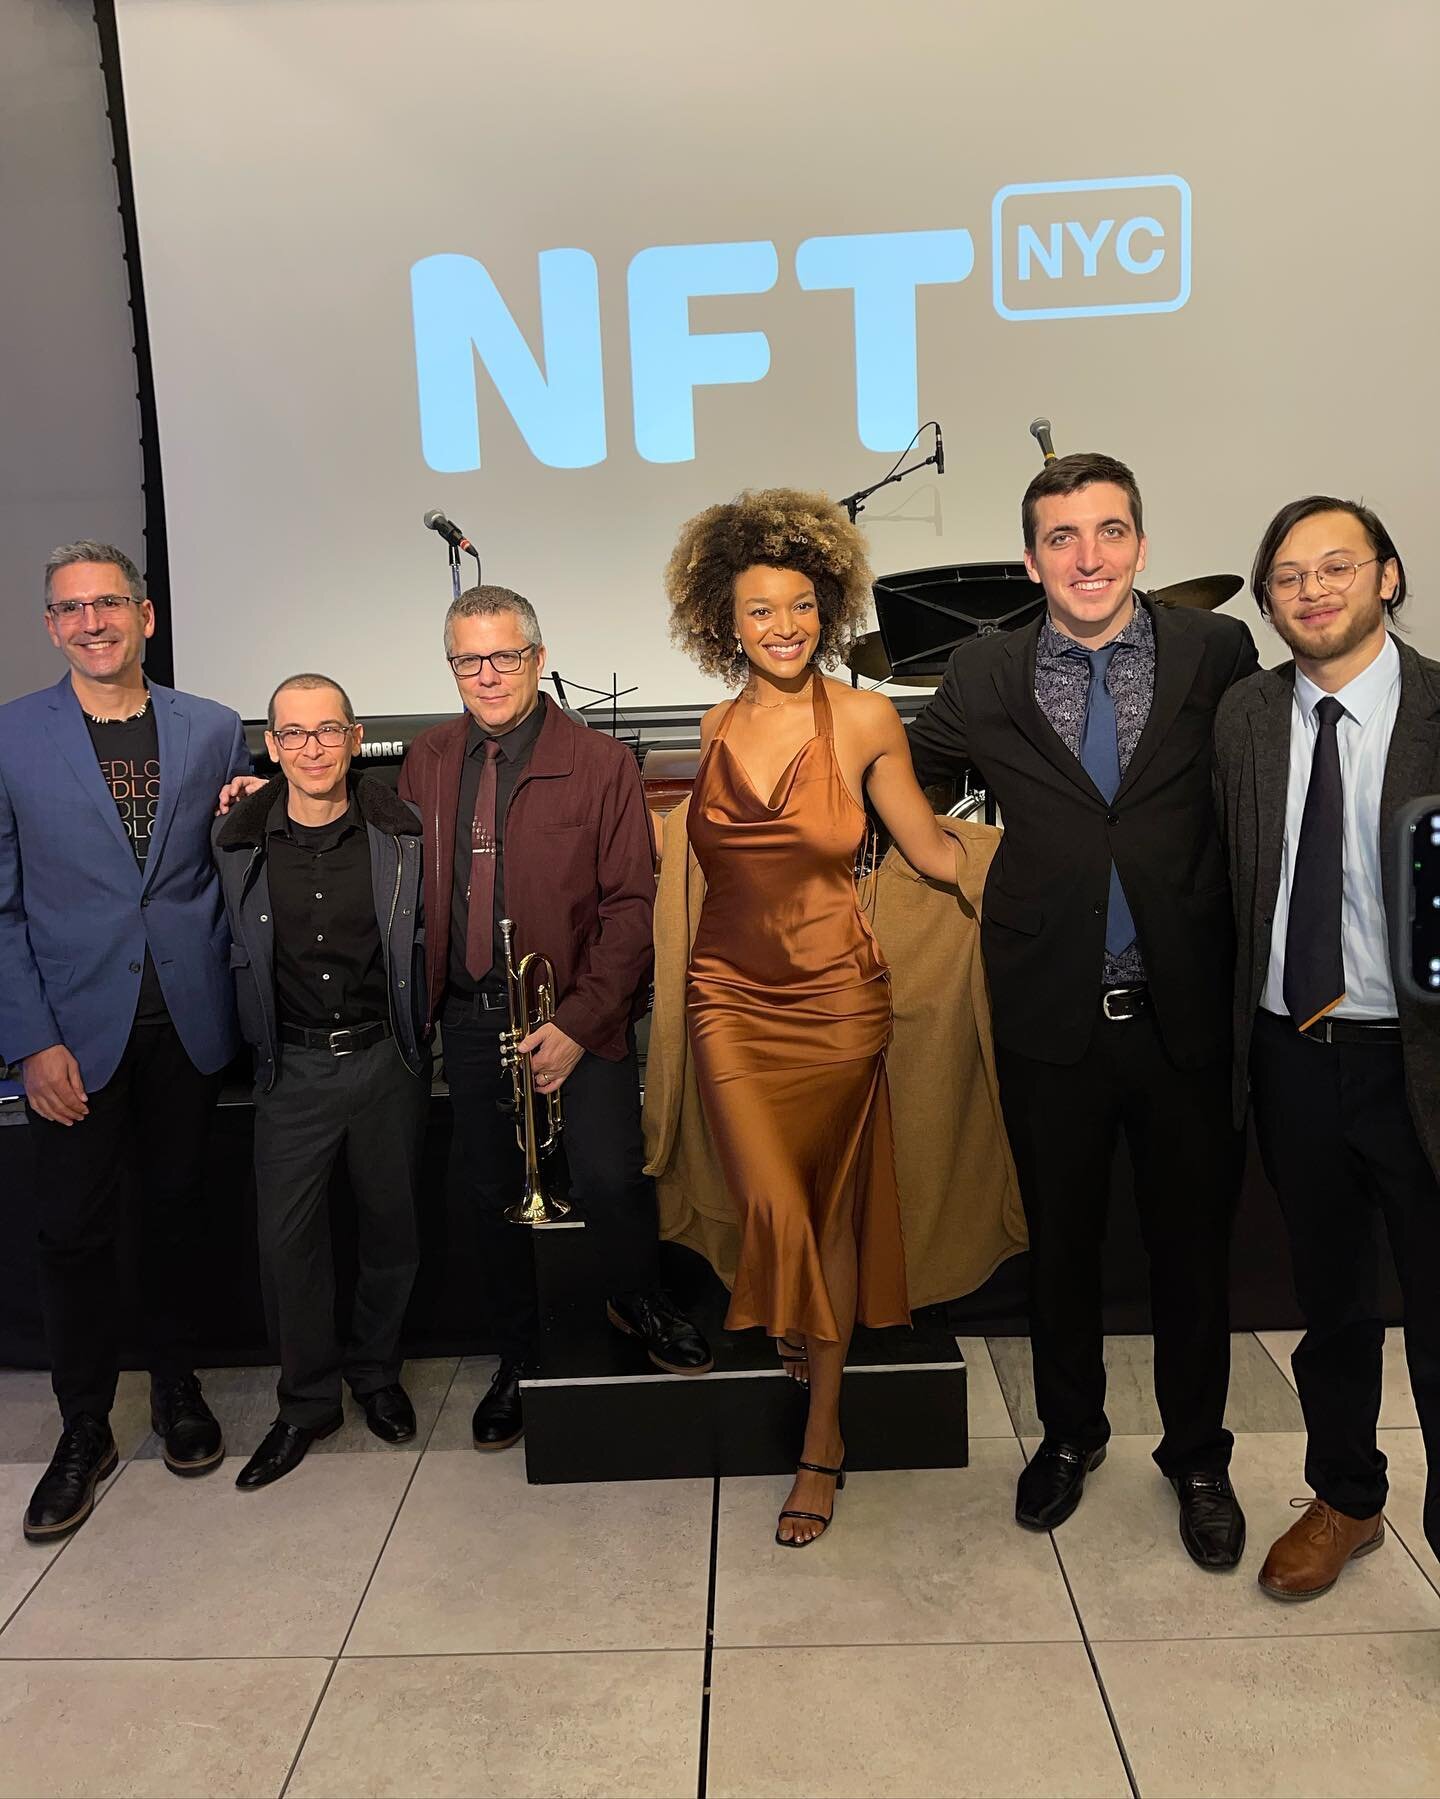 thinking fondly of our time at #NFTNYC2021 🌟💗

So much fun with this wonderful band, looking very much forward to playing together again! I feel so inspired to have been immersed in so much beautiful jazz last week&hellip; the Big Apple is POPPIN. 